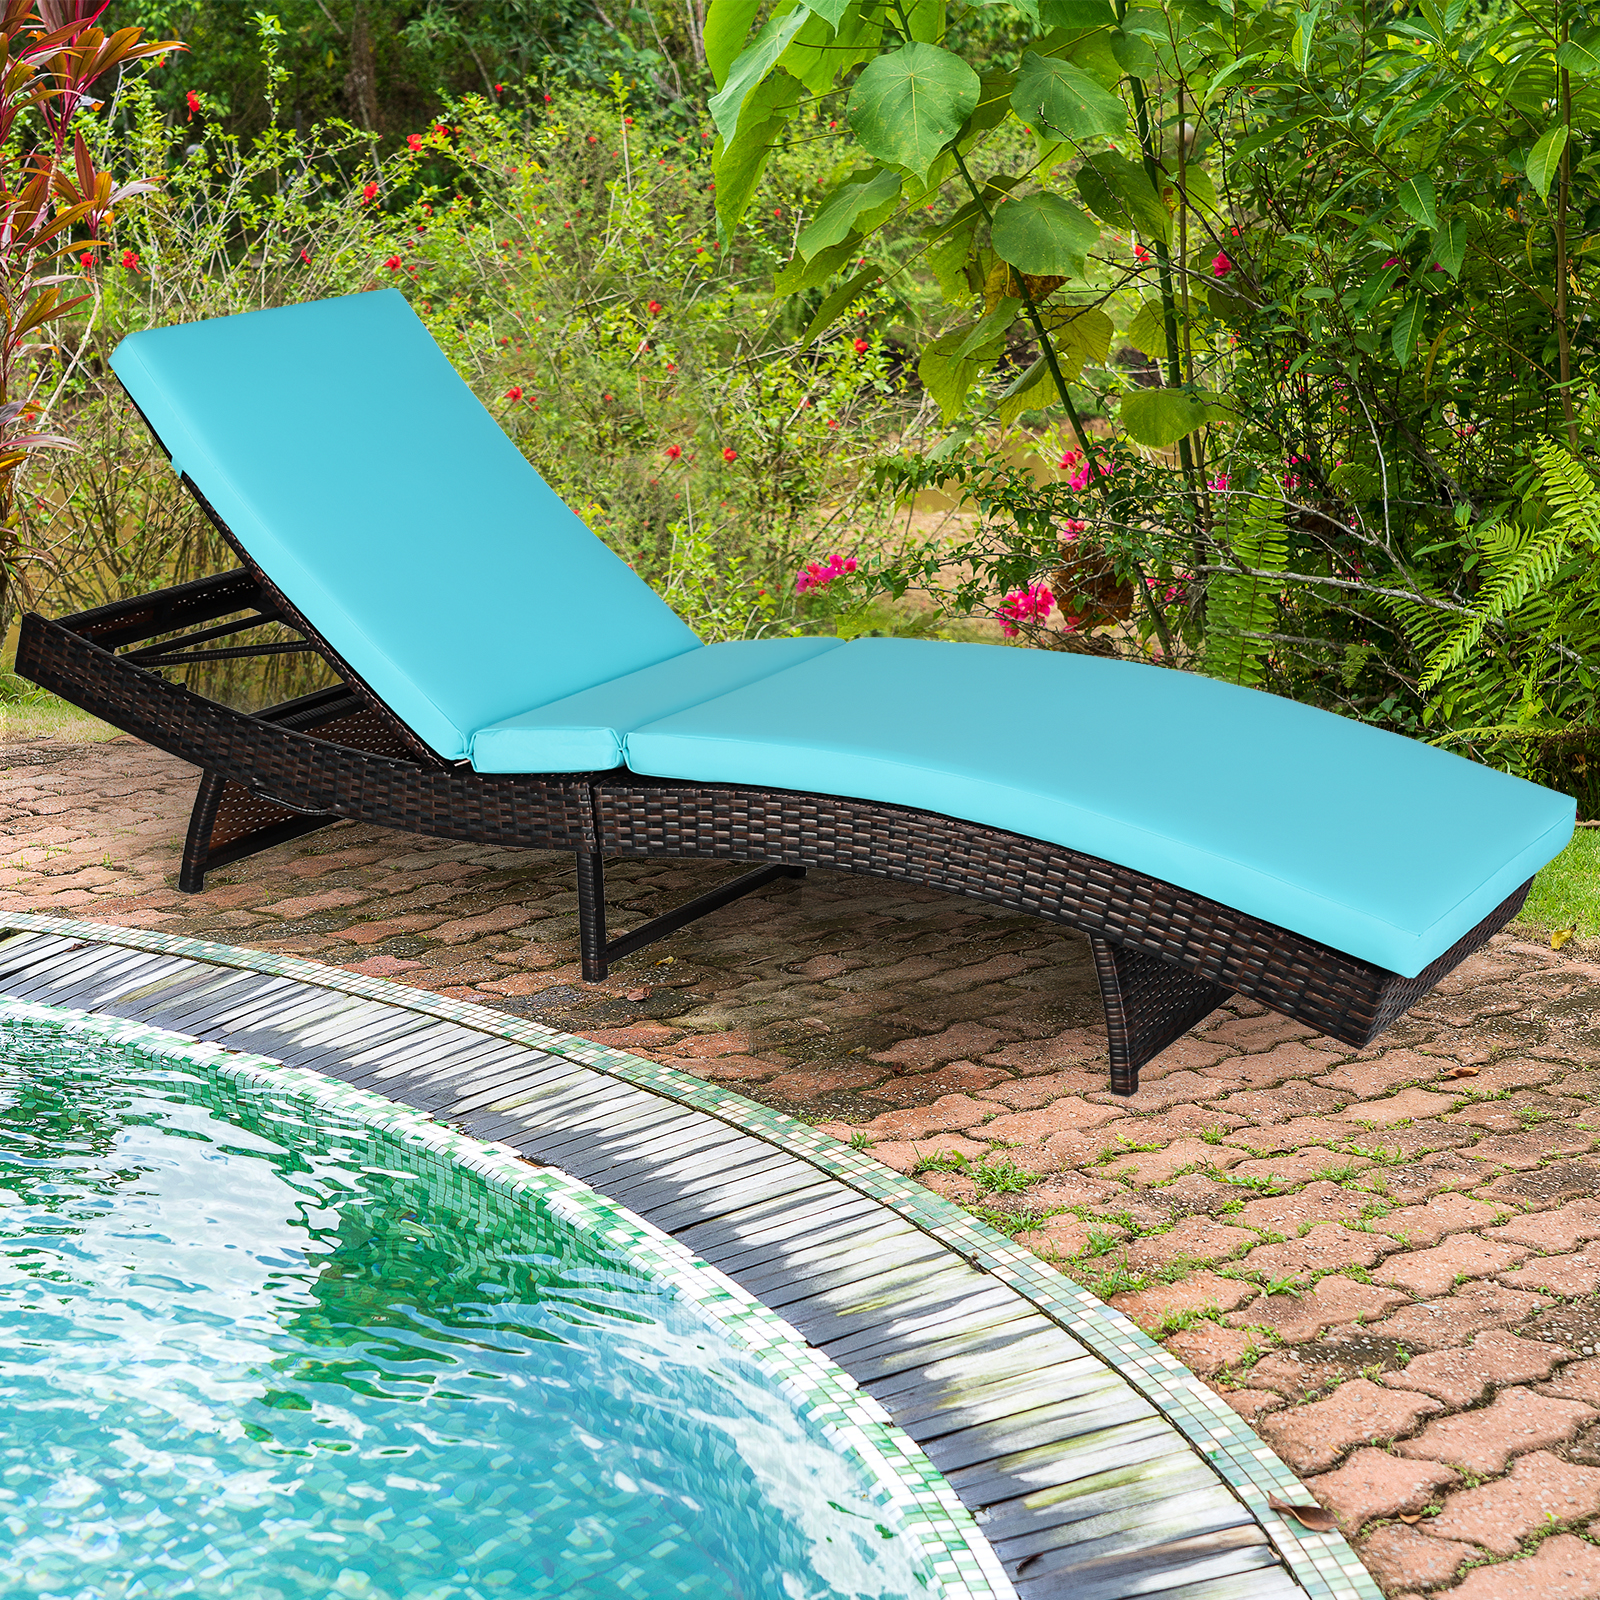 Patiojoy Patio Adjustable Rattan Chaise Lounge Chair Folding Reclining Wicker Chair - image 3 of 10